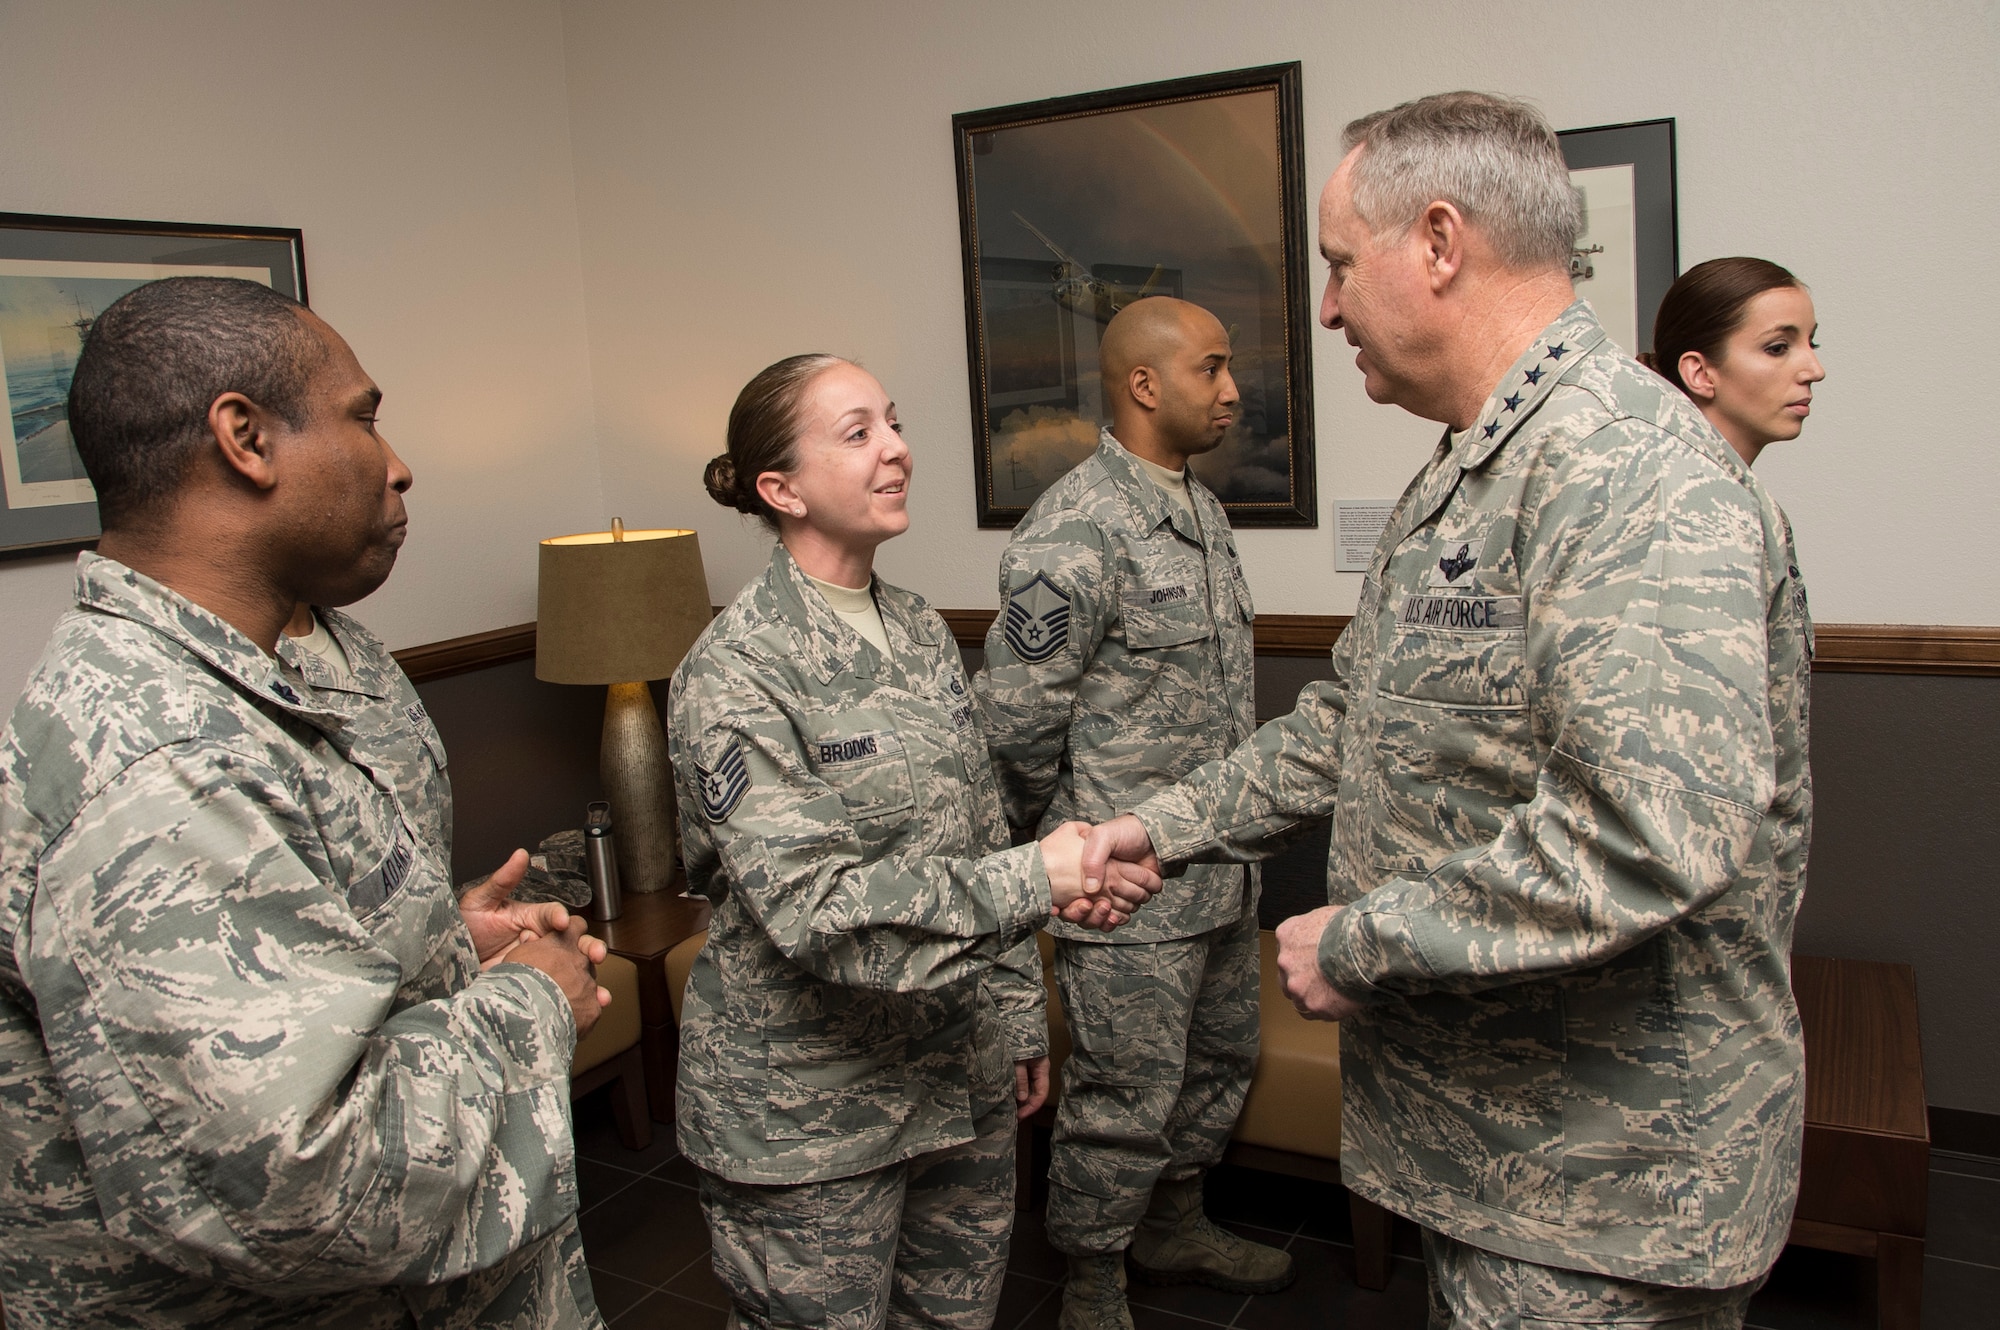 Air Force Chief of Staff Gen. Mark A. Welsh III, shakes hands with 12th Air Force (Air Forces Southern) outstanding Airmen on March 25, 2015 at Davis-Monthan AFB, Ariz. During his visit, Welsh visited the 355th Fighter Wing and spoke with active duty, Reserve and Guard Airmen. (U.S. Air Force photo by Staff Sgt. Adam Grant/Released)